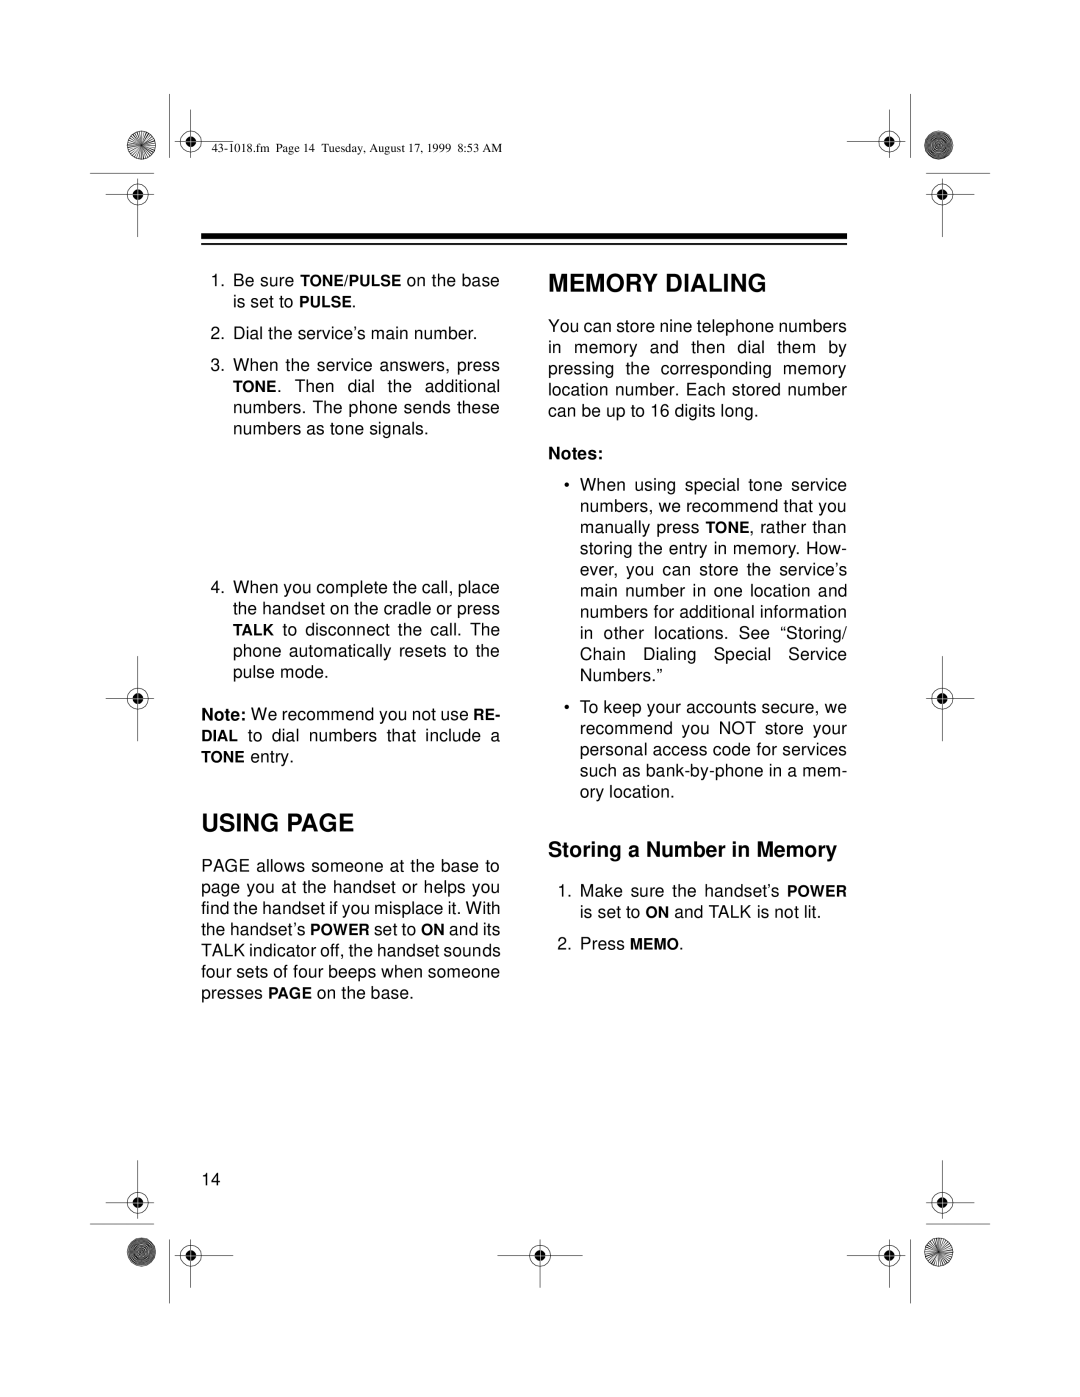 Radio Shack ET-518 owner manual Using Page, Memory Dialing, Storing a Number in Memory 